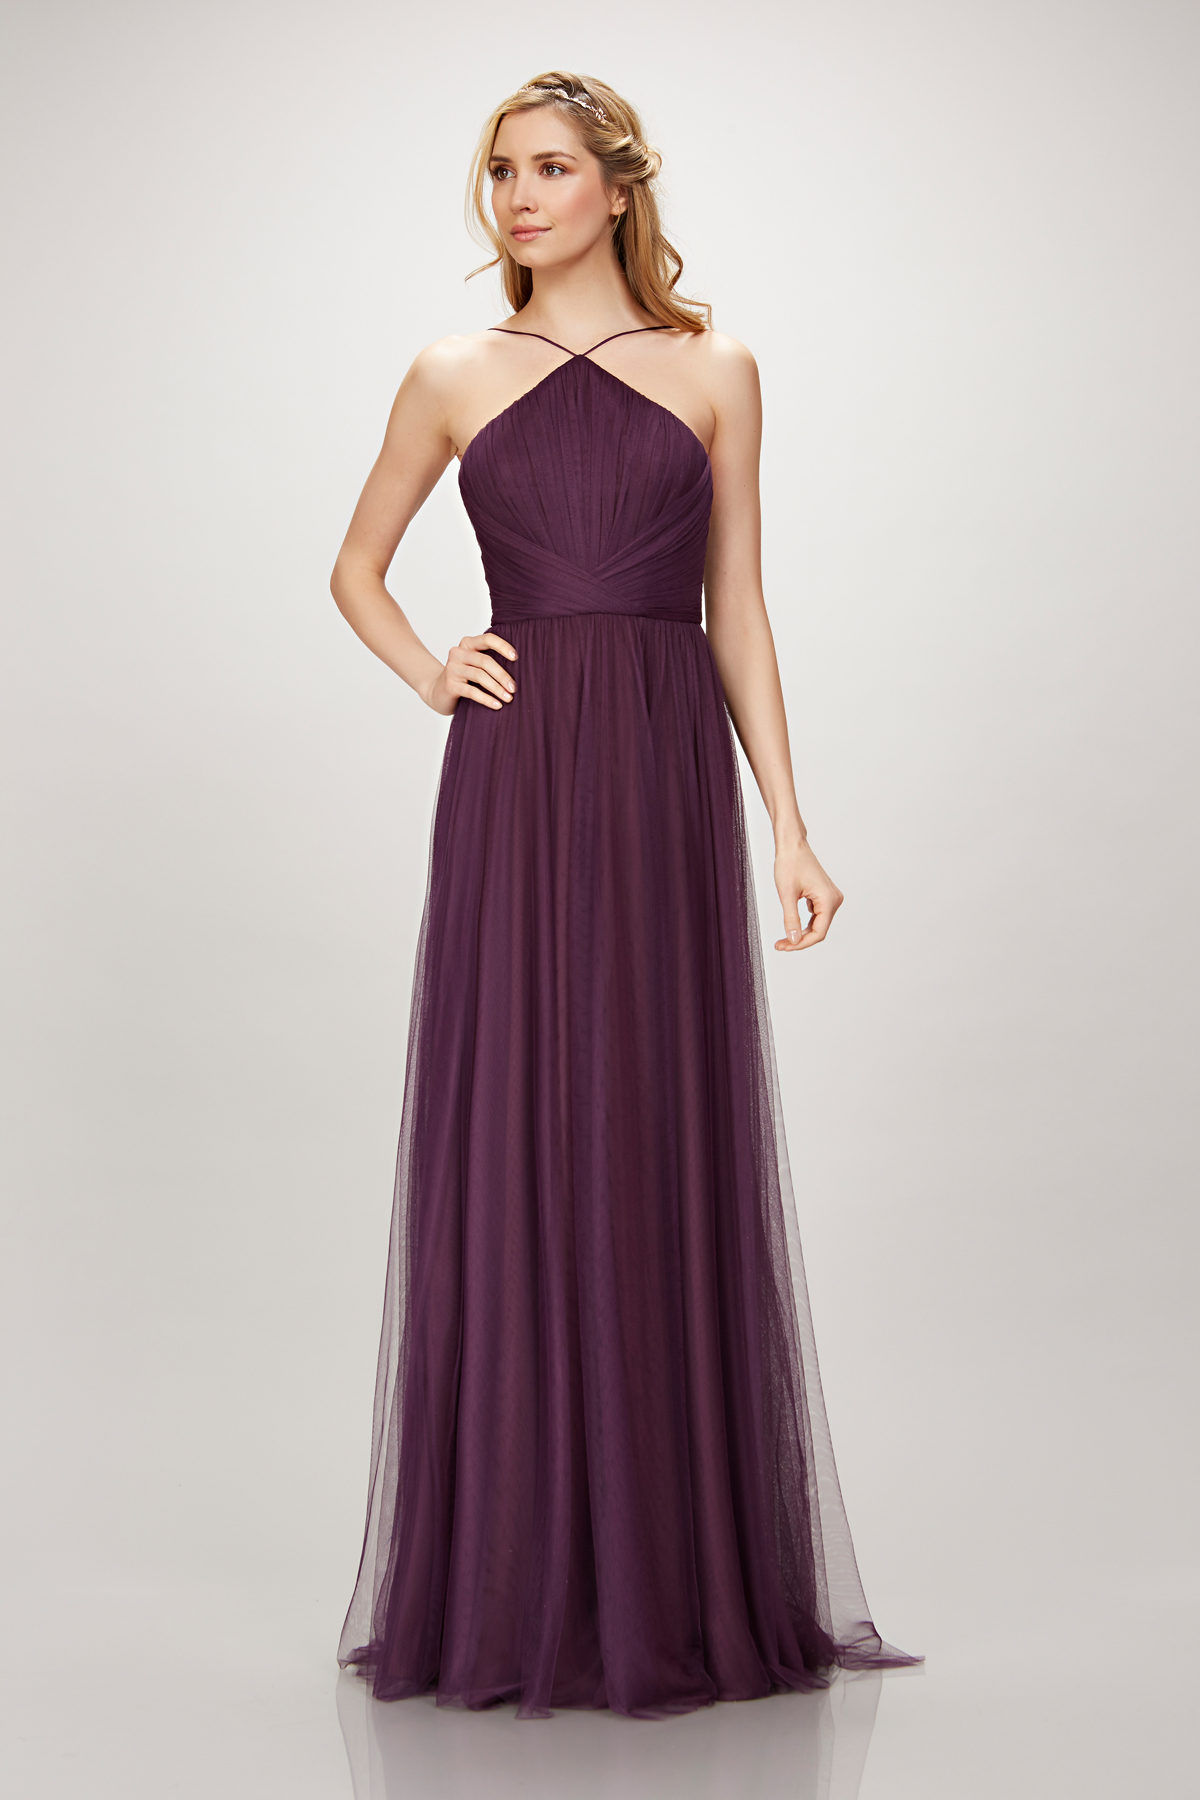 Theia Plum Halter Bridesmaid Gown for outdoor wedding